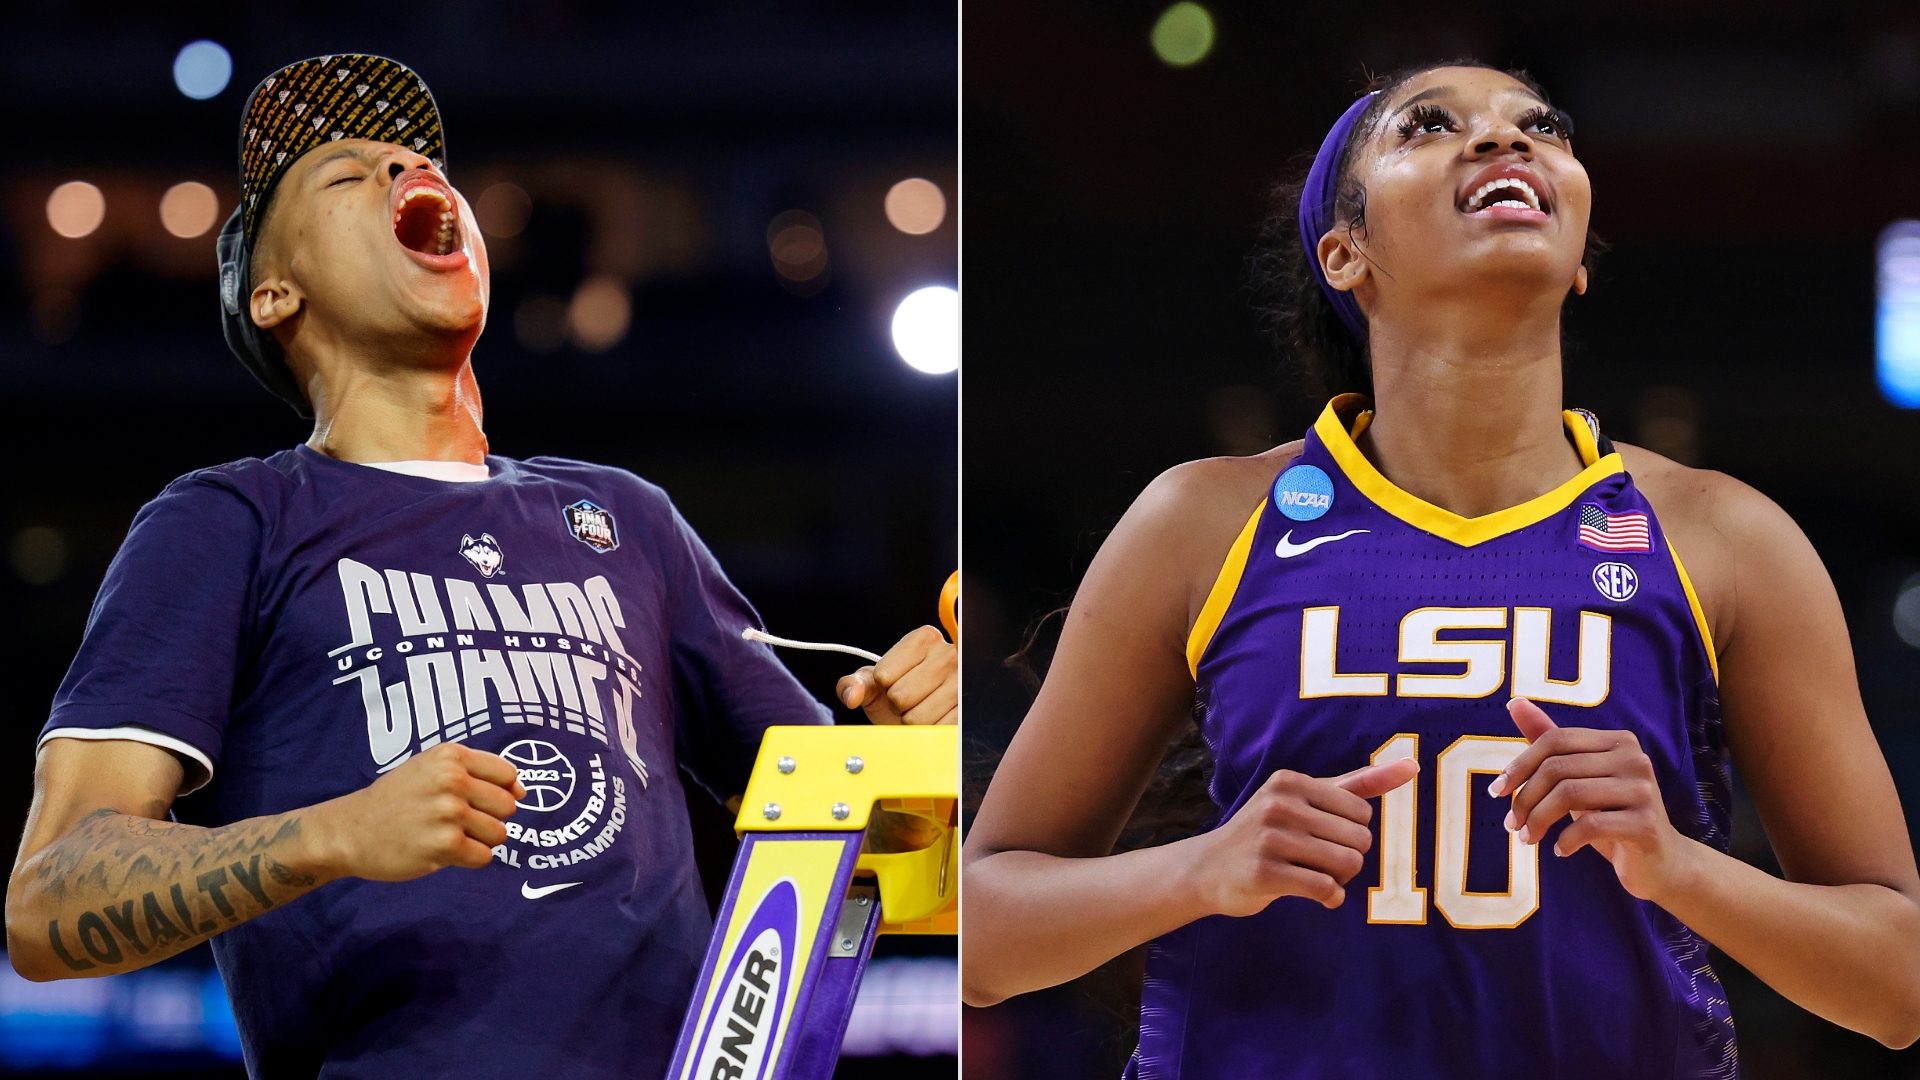 UConn's Jordan Hawkins excited for championship celebration with cousin, LSU's Angel Reese: 'The cookout gone be lit'